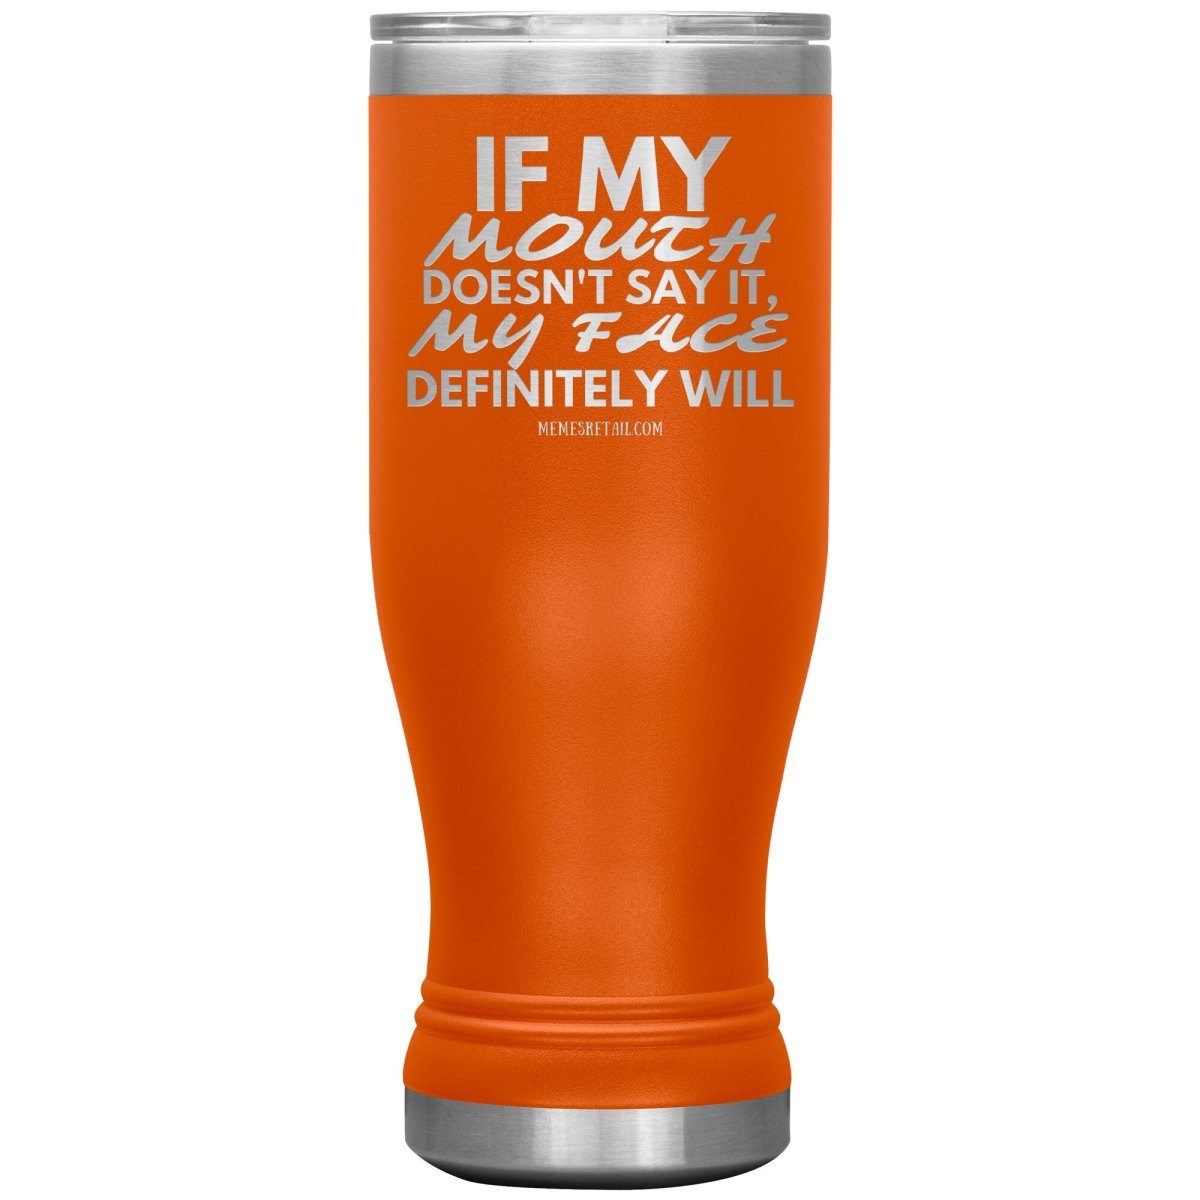 If my mouth doesn't say it, my face definitely will Tumblers, 20oz BOHO Insulated Tumbler / Orange - MemesRetail.com